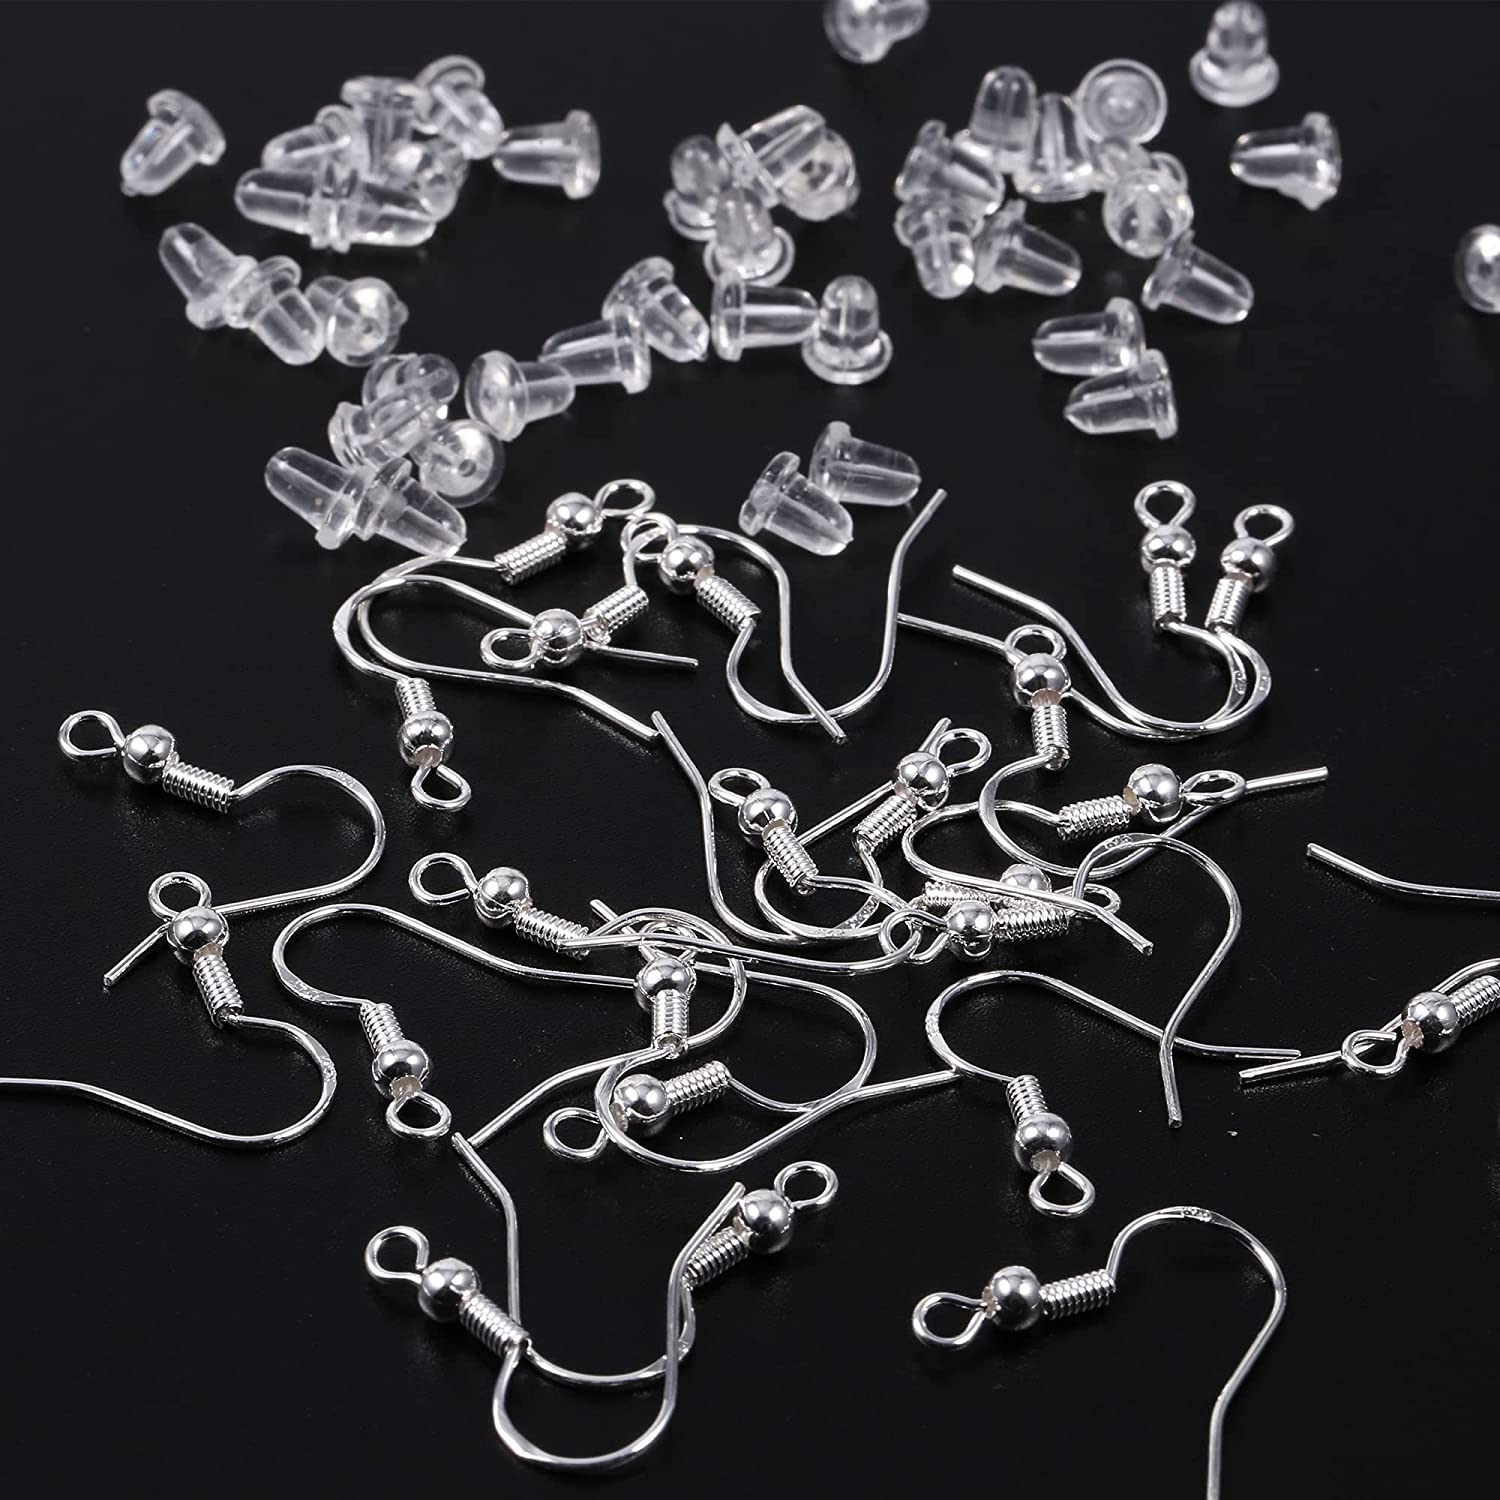 60 Pairs of 925 Sterling Silver Hypoallergenic Earring Hooks Ear Wires Fish Earring Hooks for Jewelry Making Earring Making Supplies with Earring Backs for Women - image 4 of 6